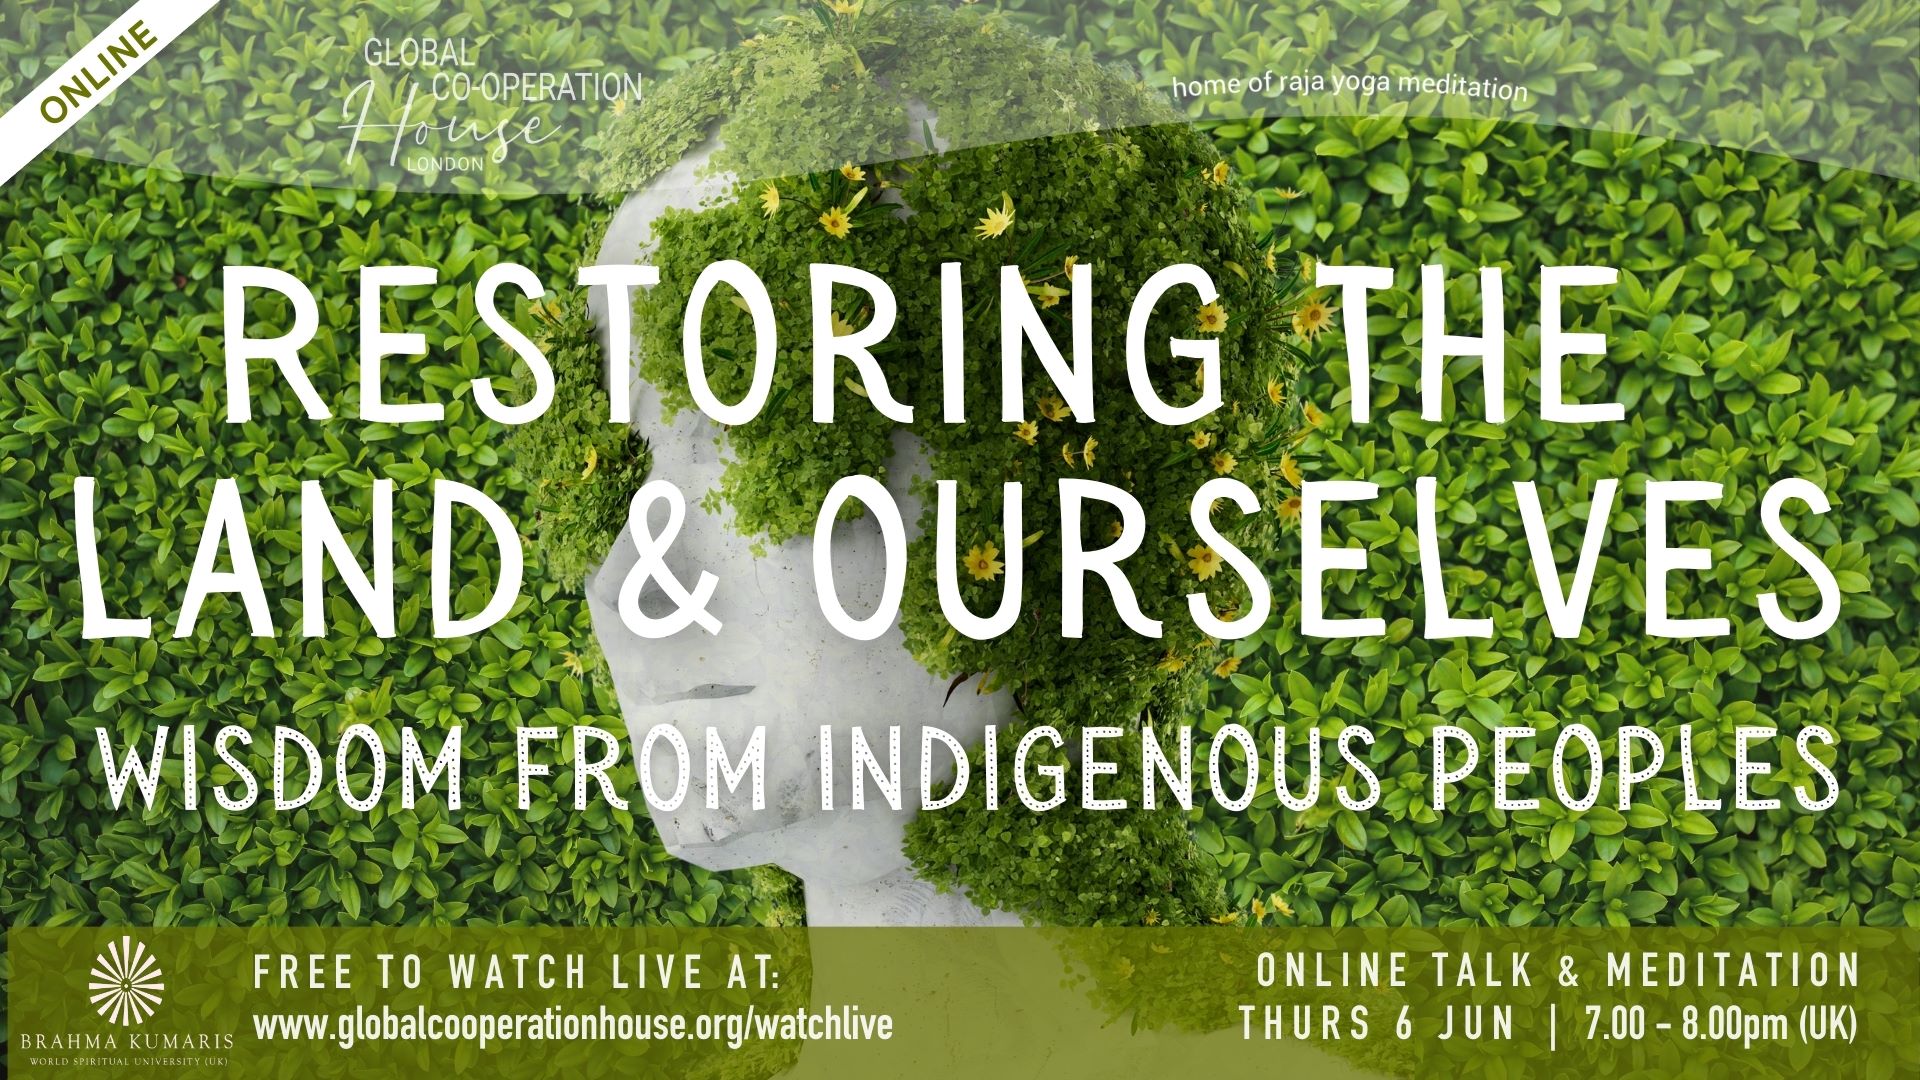 Restoring the Land and Ourselves: Wisdom from Indigenous Peoples